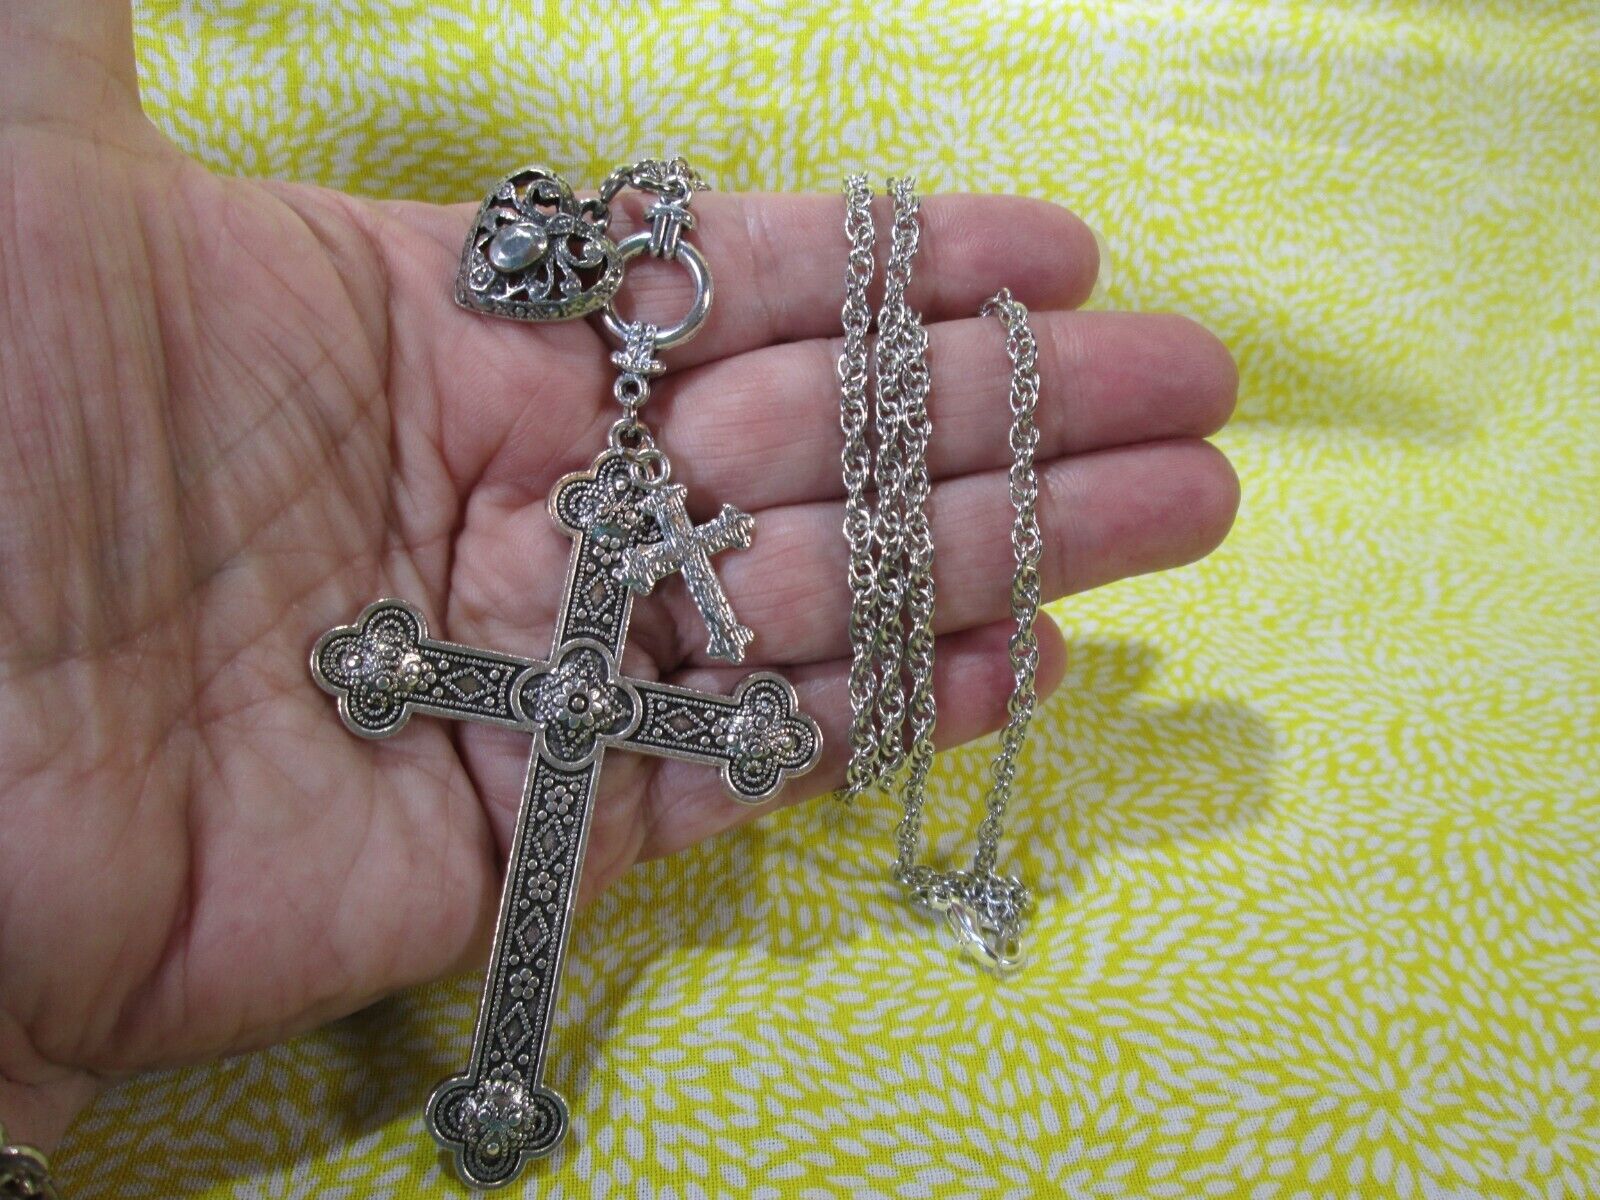 Large Cross Pendant/Heart Charm w/ Necklace 25" Silver Plated Rope Chain / S Handmade